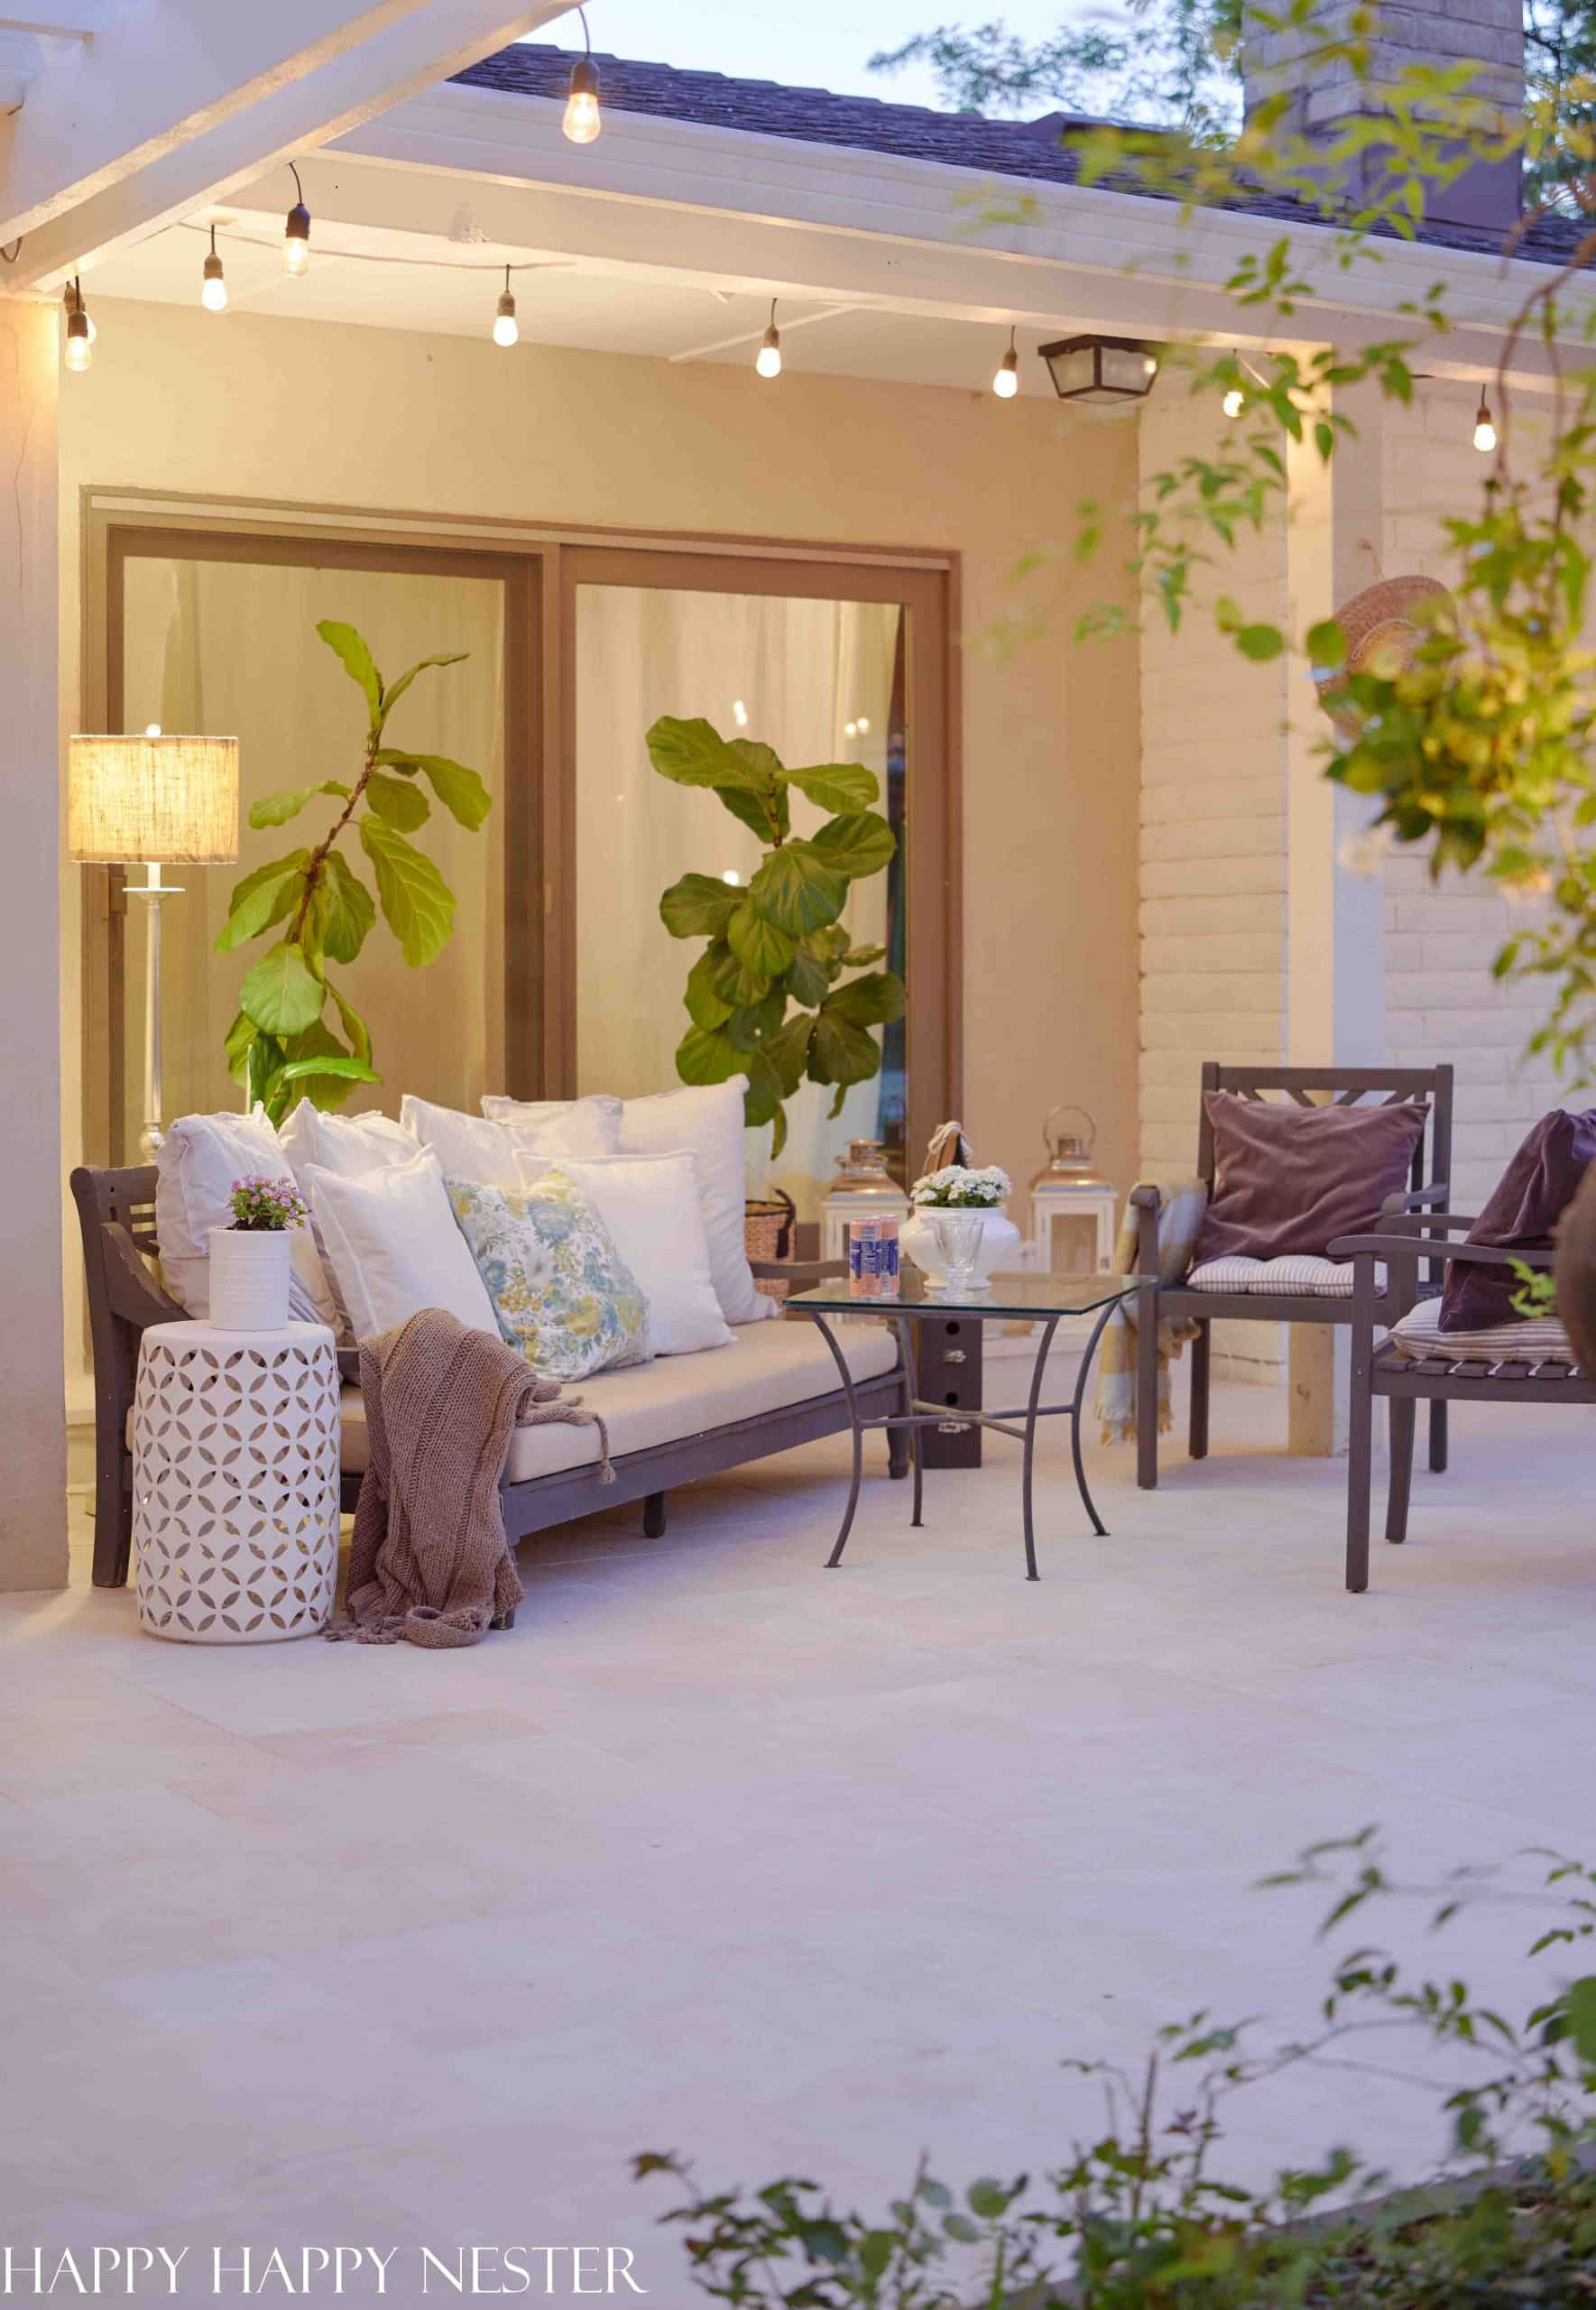 10 Decorating Outdoor Patio For A Relaxing And Stylish Space